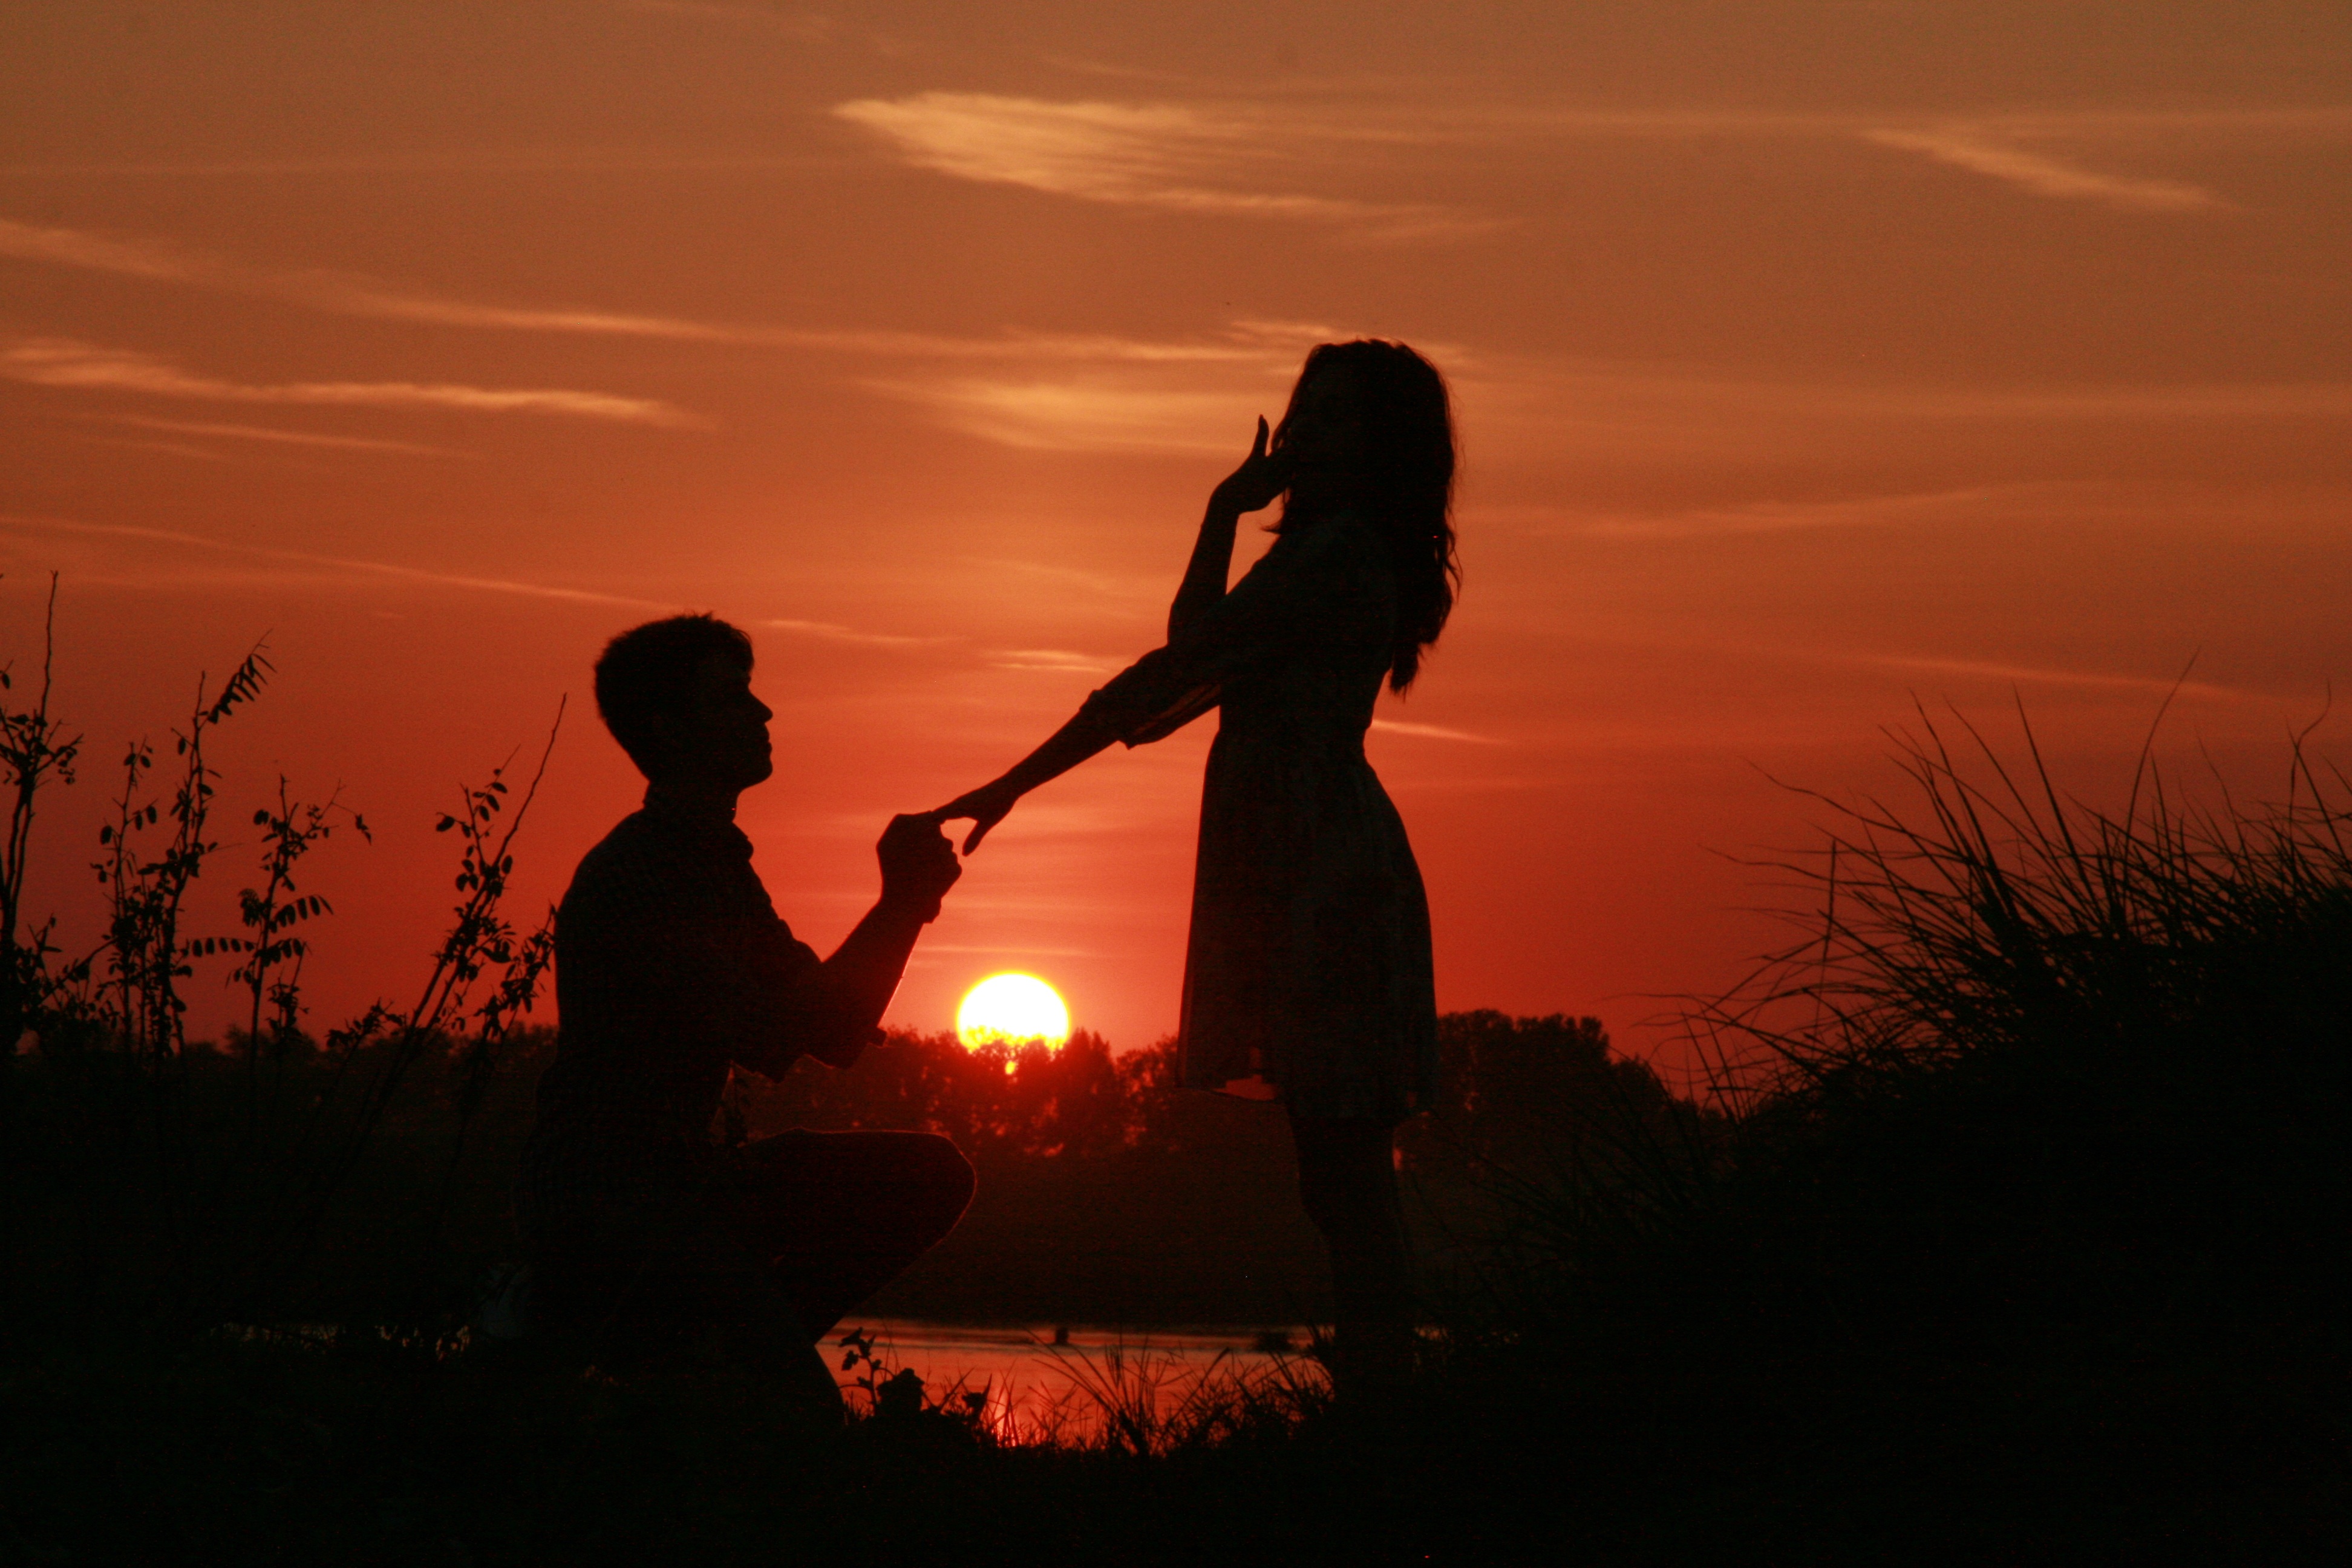 Realation, propose day images for girlfriend